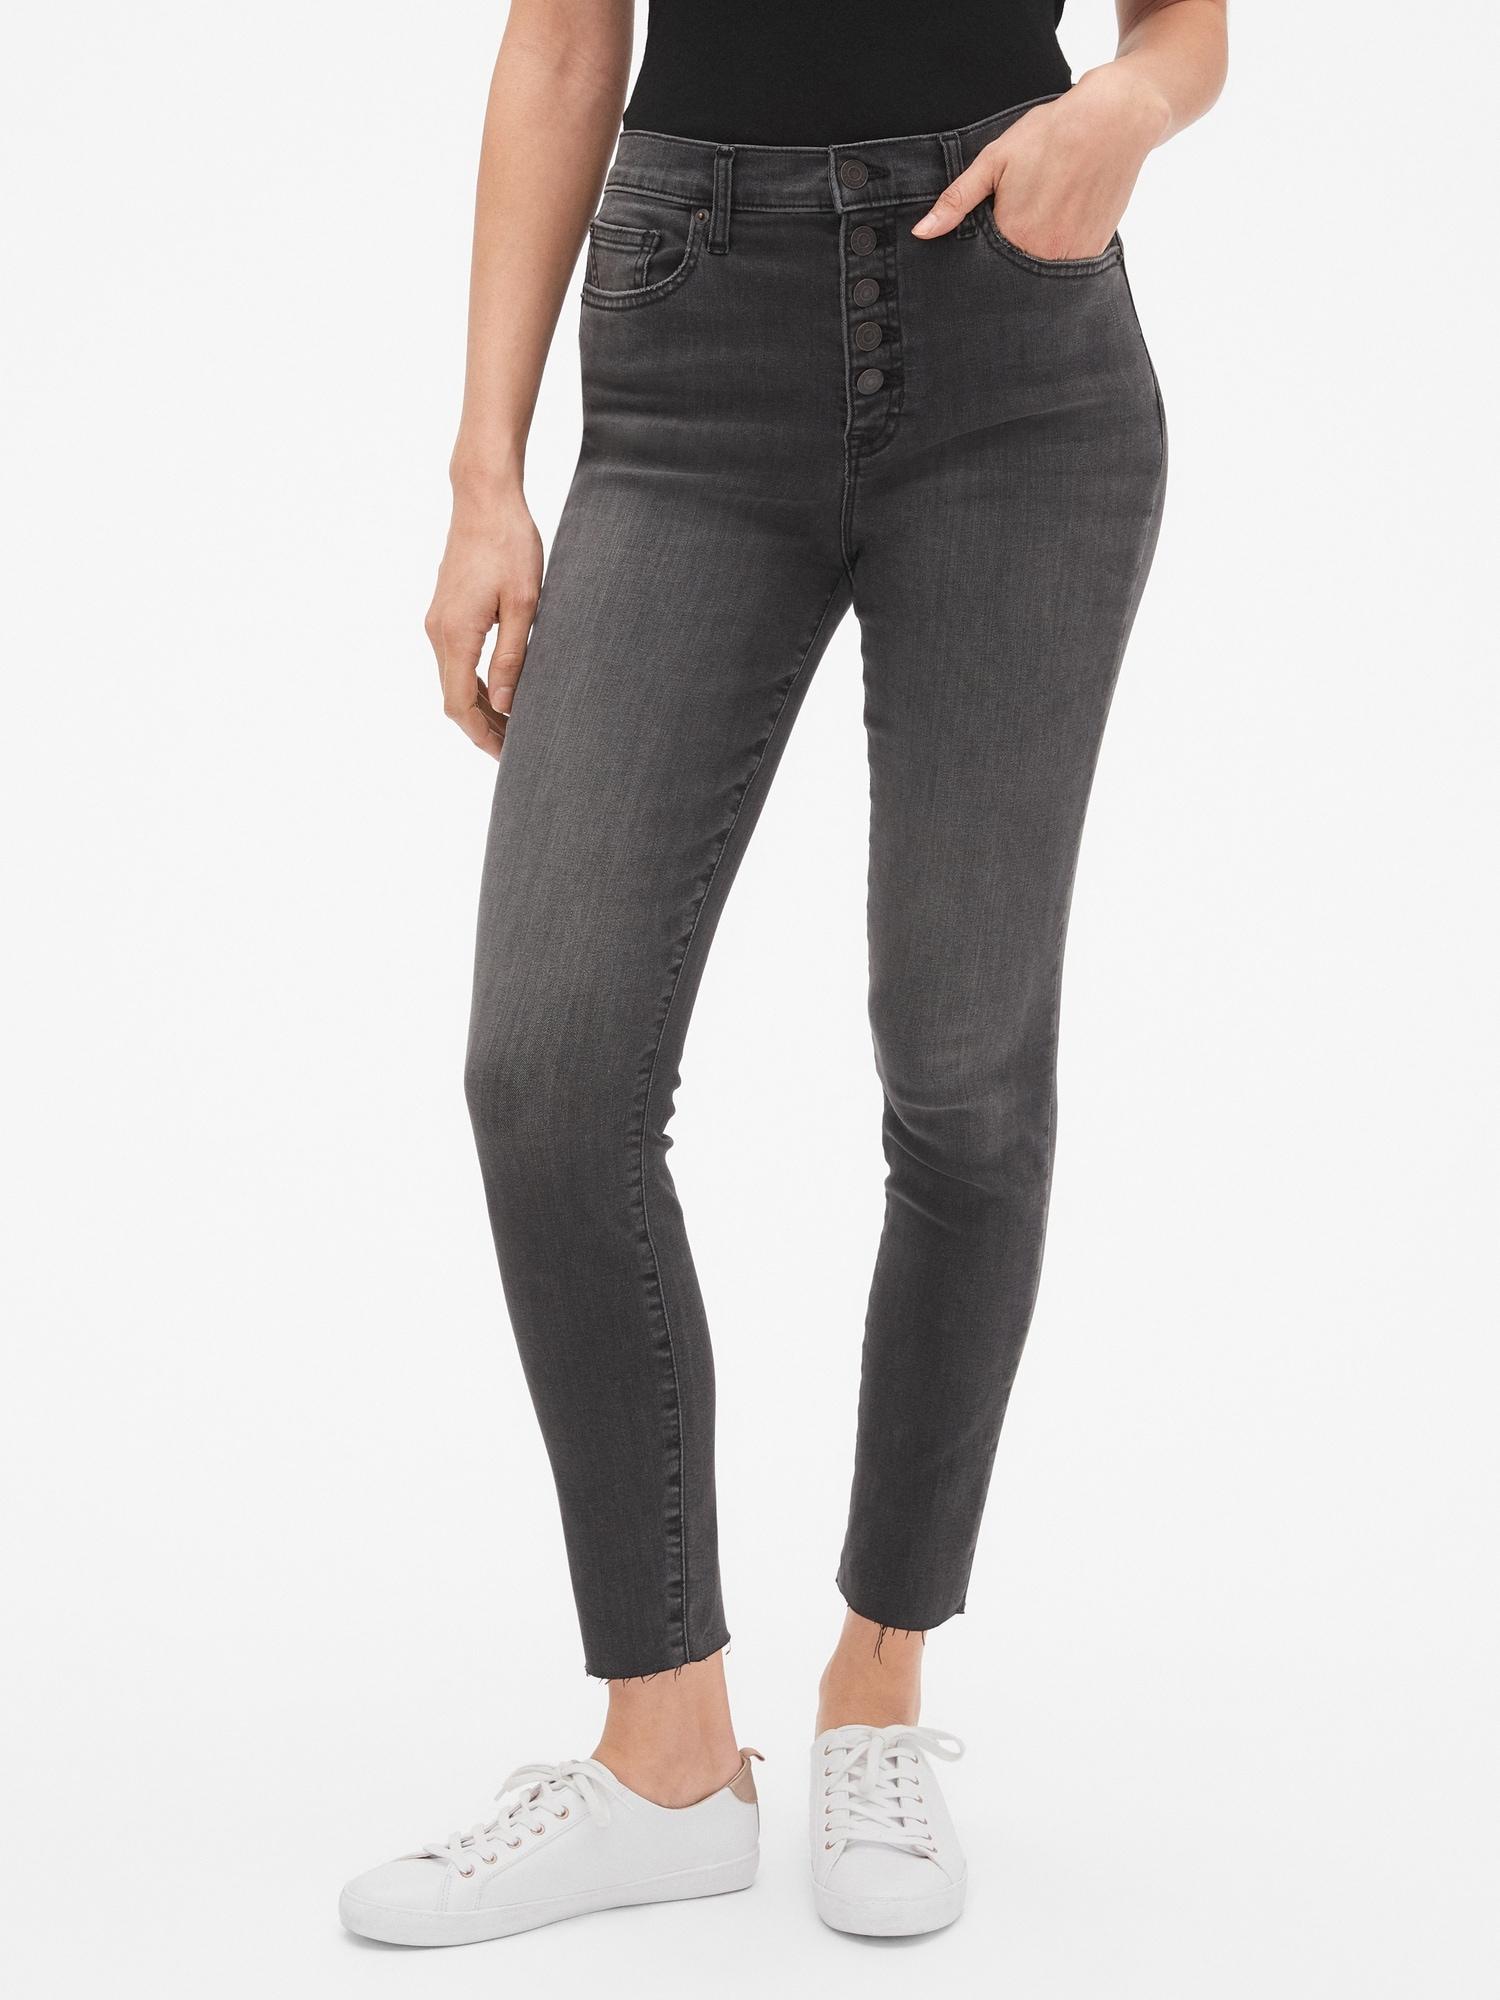 GAP Factory Denim High Rise Legging Skimmer Jeans With Button Fly in ...